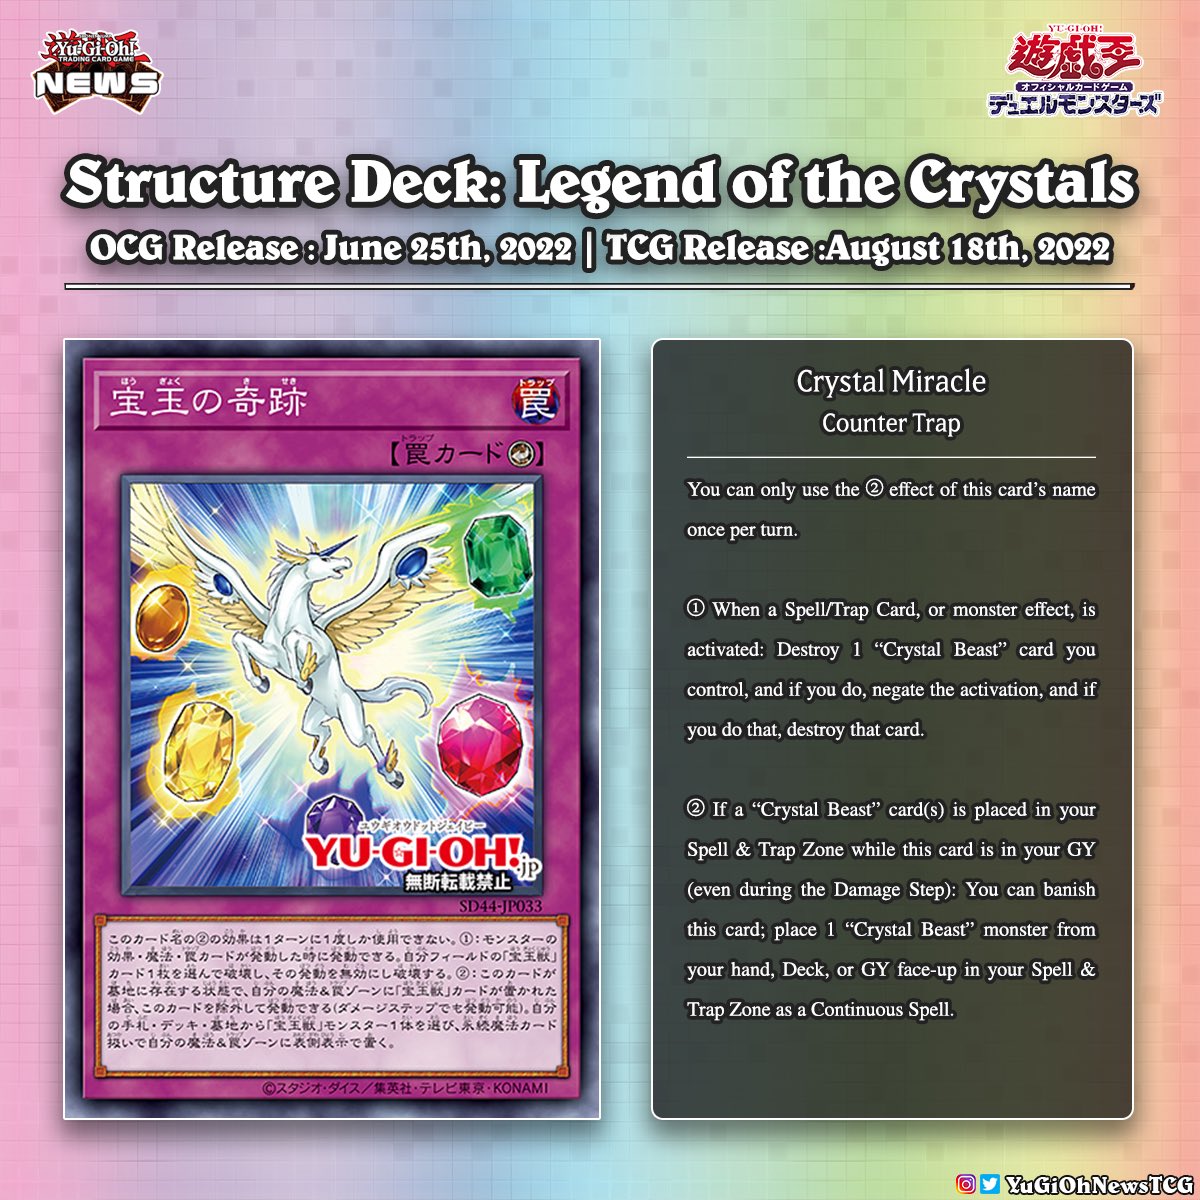 Yugioh News 𝗟𝗲𝗴𝗲𝗻𝗱 𝗼𝗳 𝘁𝗵𝗲 𝗖𝗿𝘆𝘀𝘁𝗮𝗹 𝗕𝗲𝗮𝘀𝘁𝘀 Three New Cards Have Been Revealed For The Upcoming Structure Deck Legend Of The Crystal Beasts Translation Ygorganization 遊戯王 Yugioh 유희왕 T Co